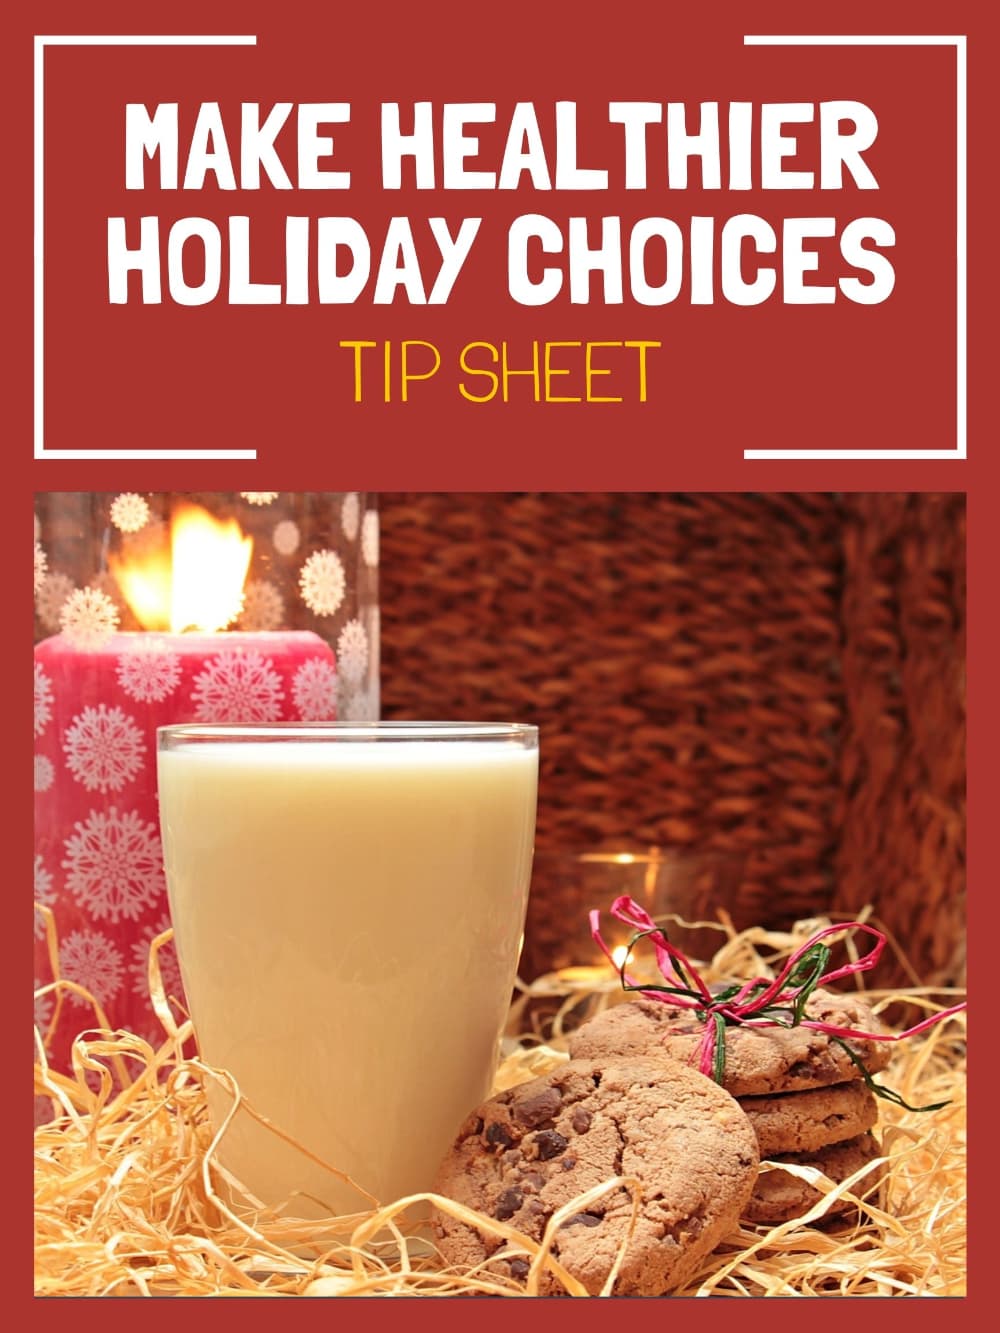 Making Healthier Holiday Choices